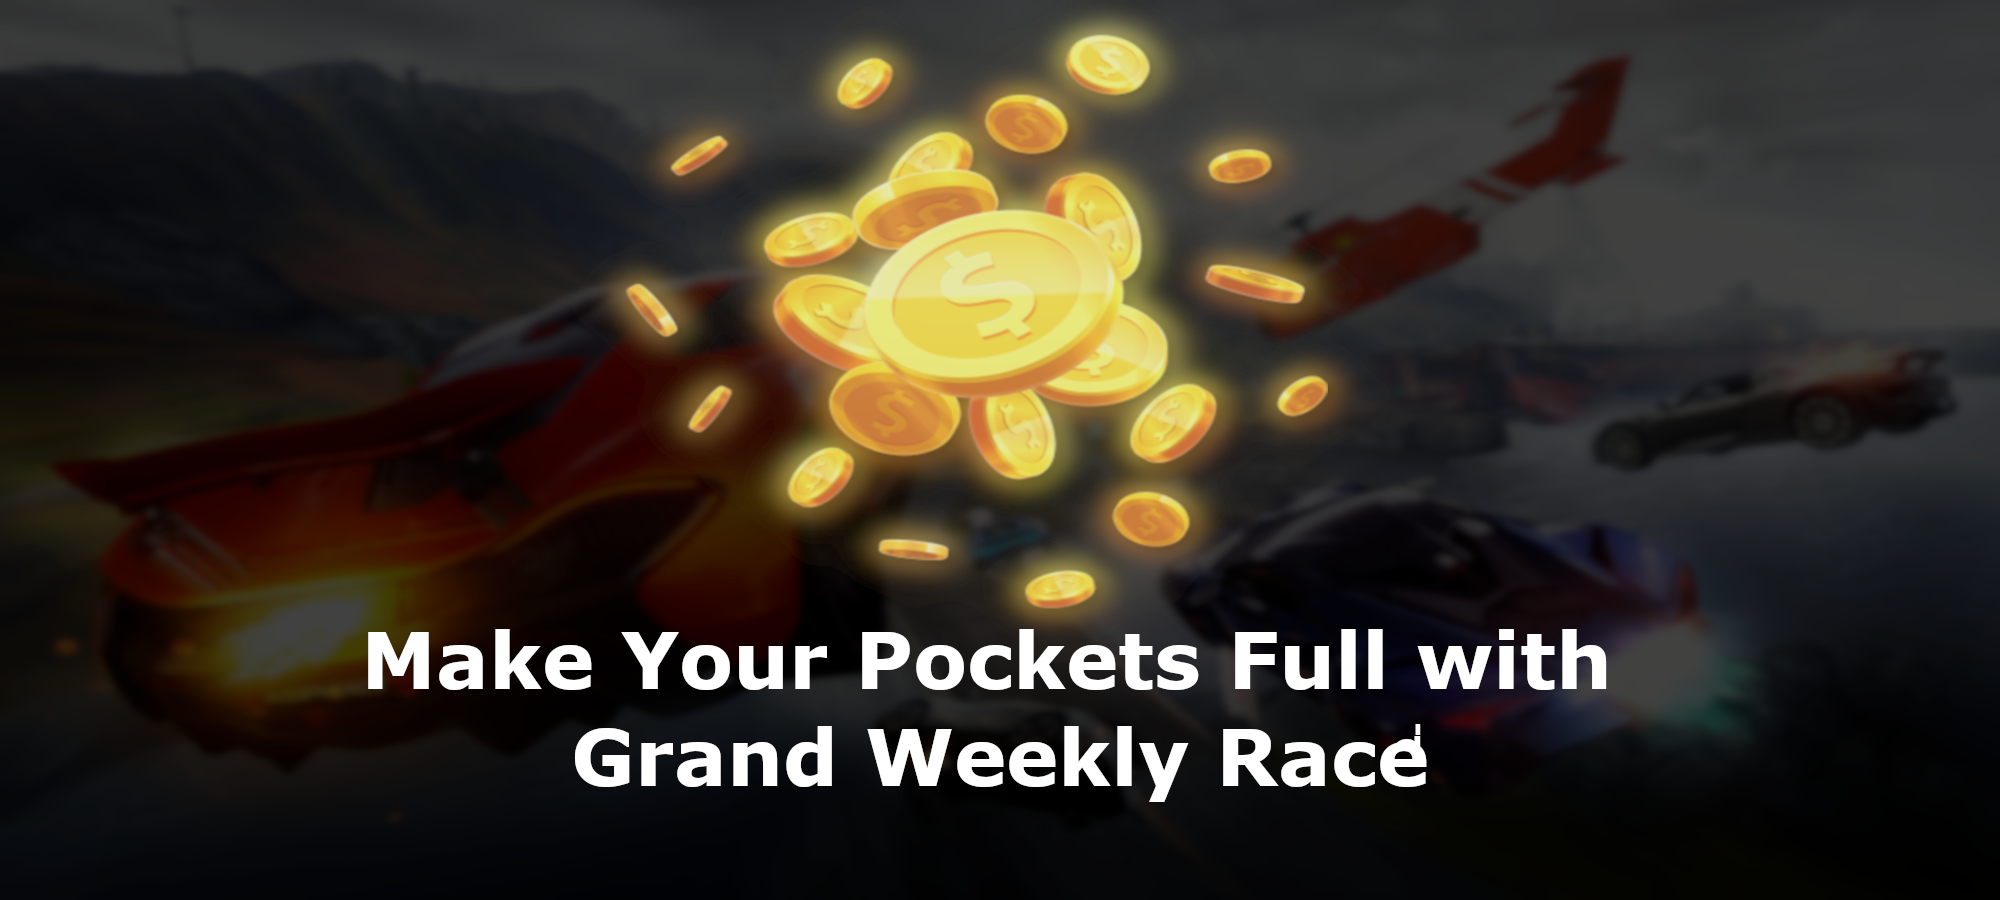 Make Your Pockets Full with Grand Weekly Race